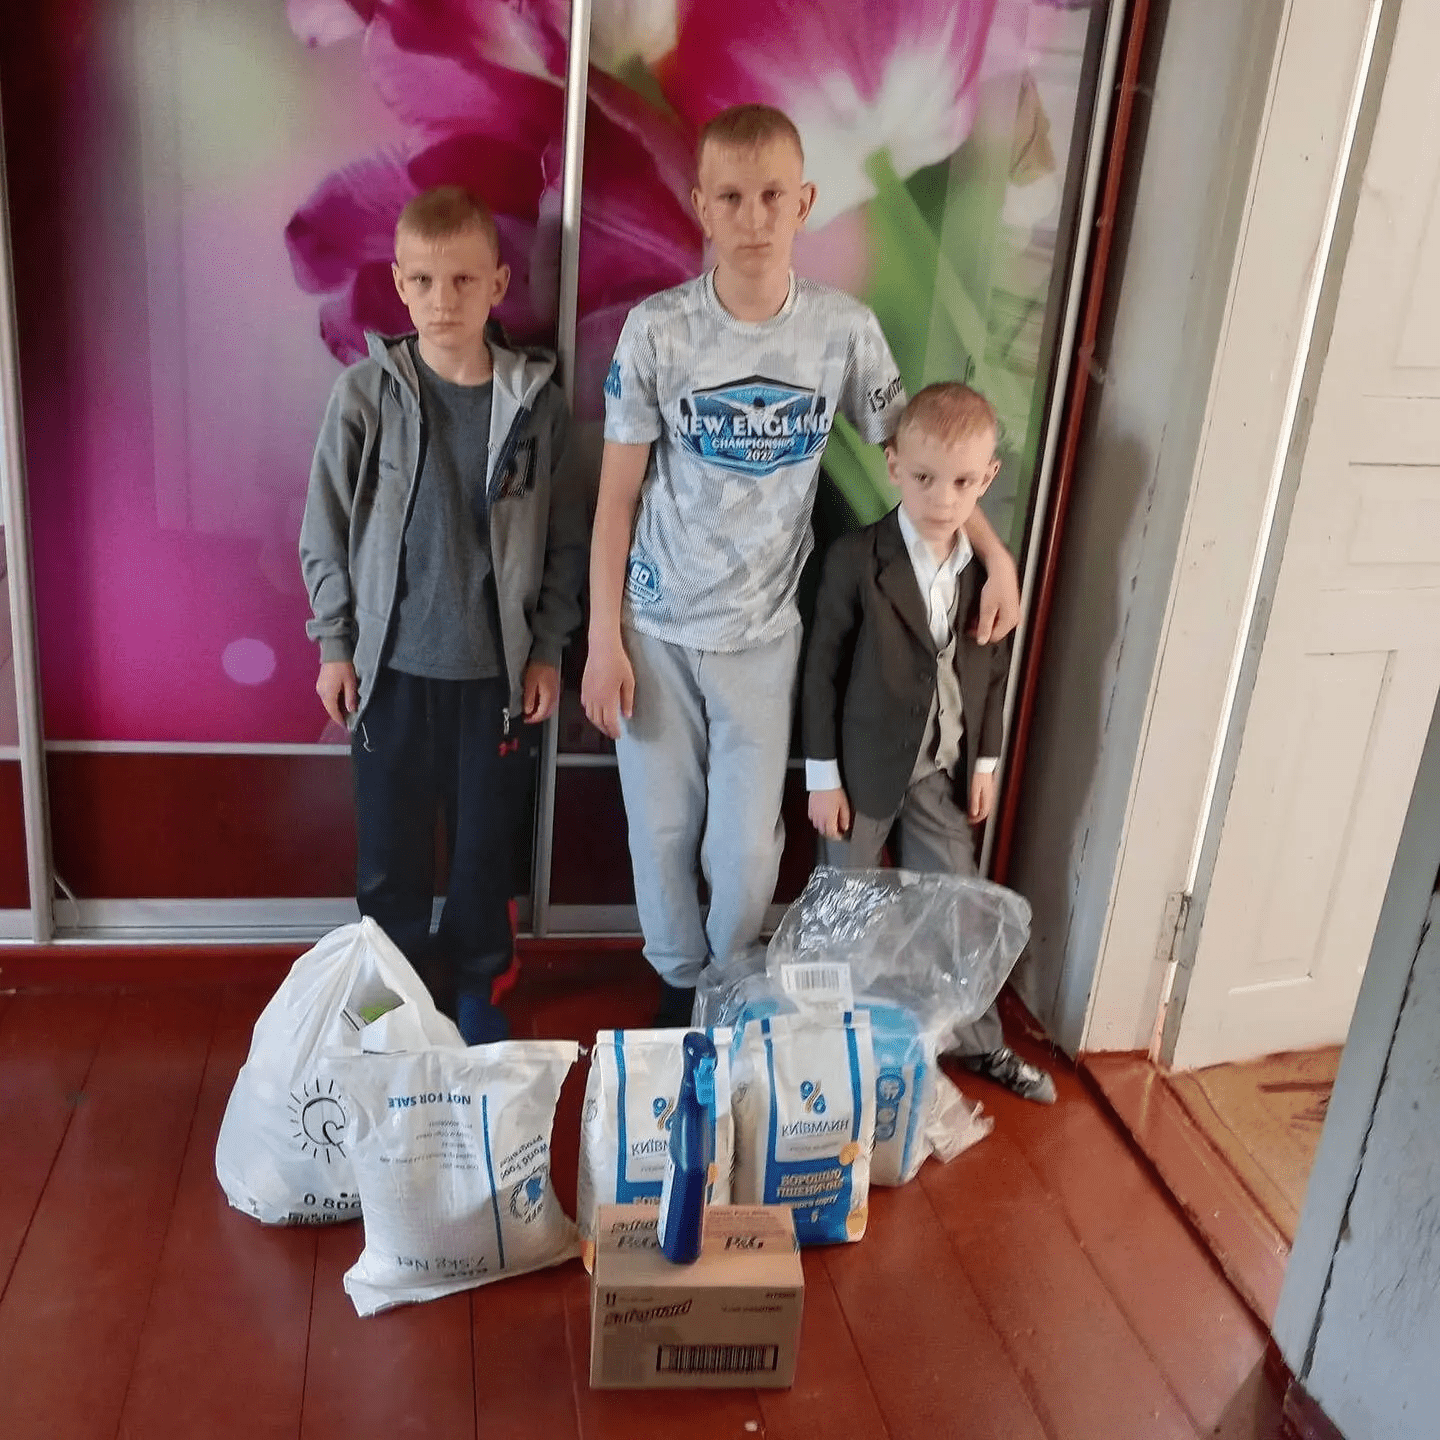 three young boys standing next to a pile of bags.